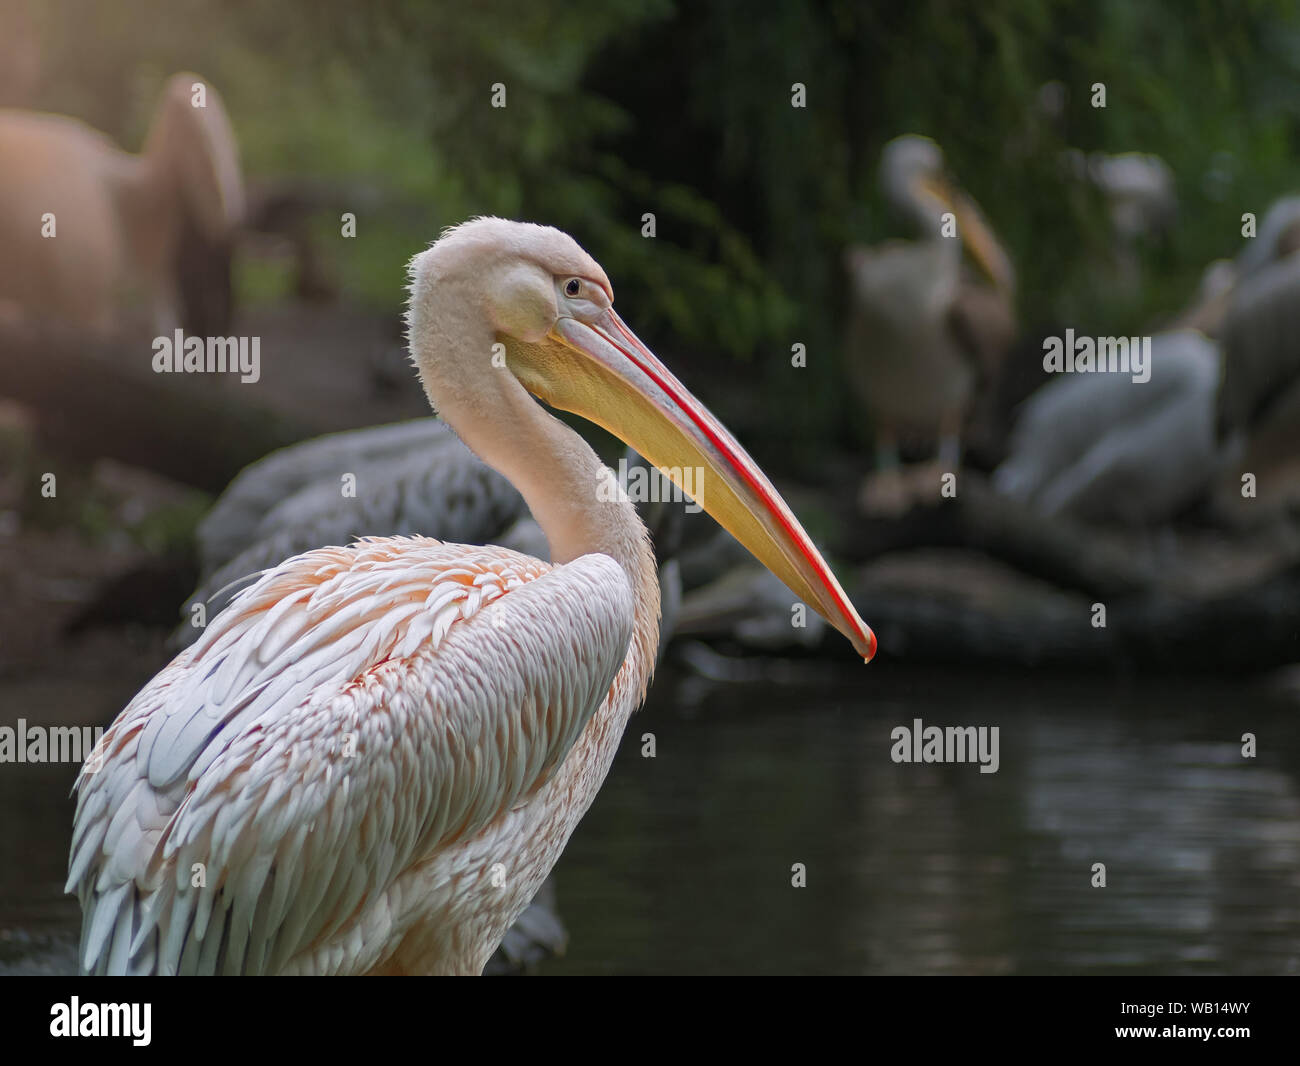 Portrait of Pelican with blurry background Stock Photo